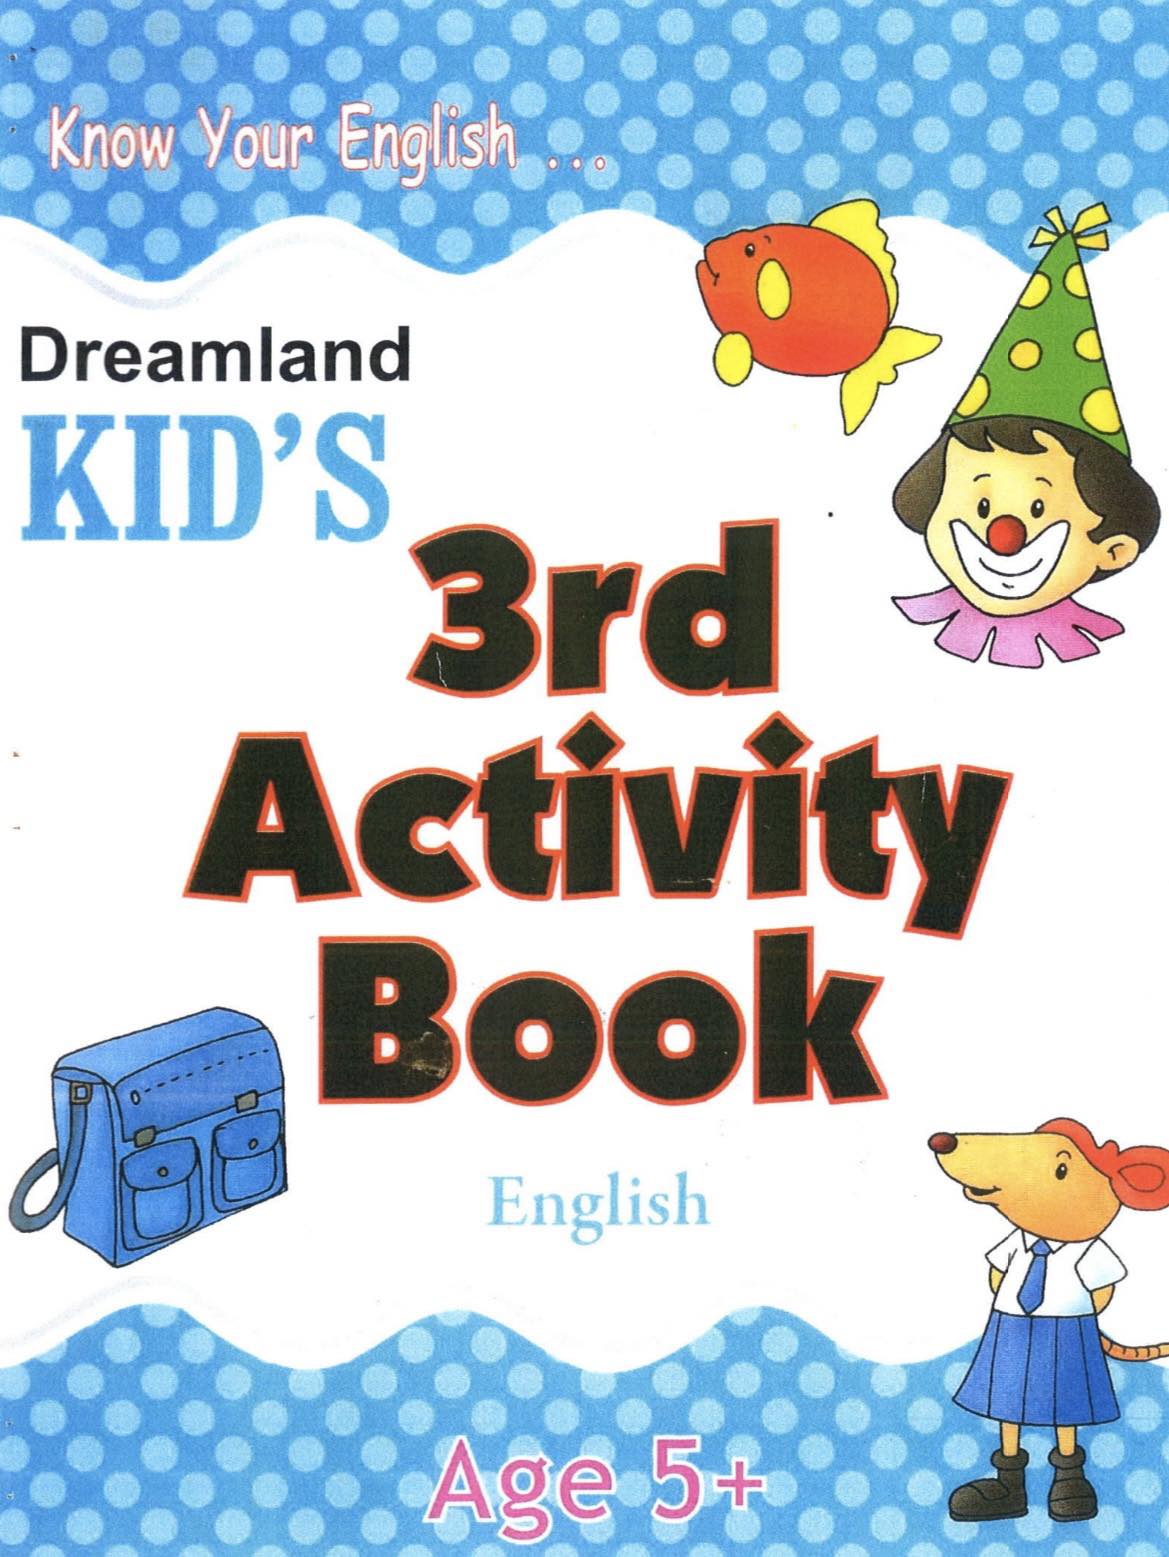 Dreamland Kid's 3rd Activity Book for Age 5+